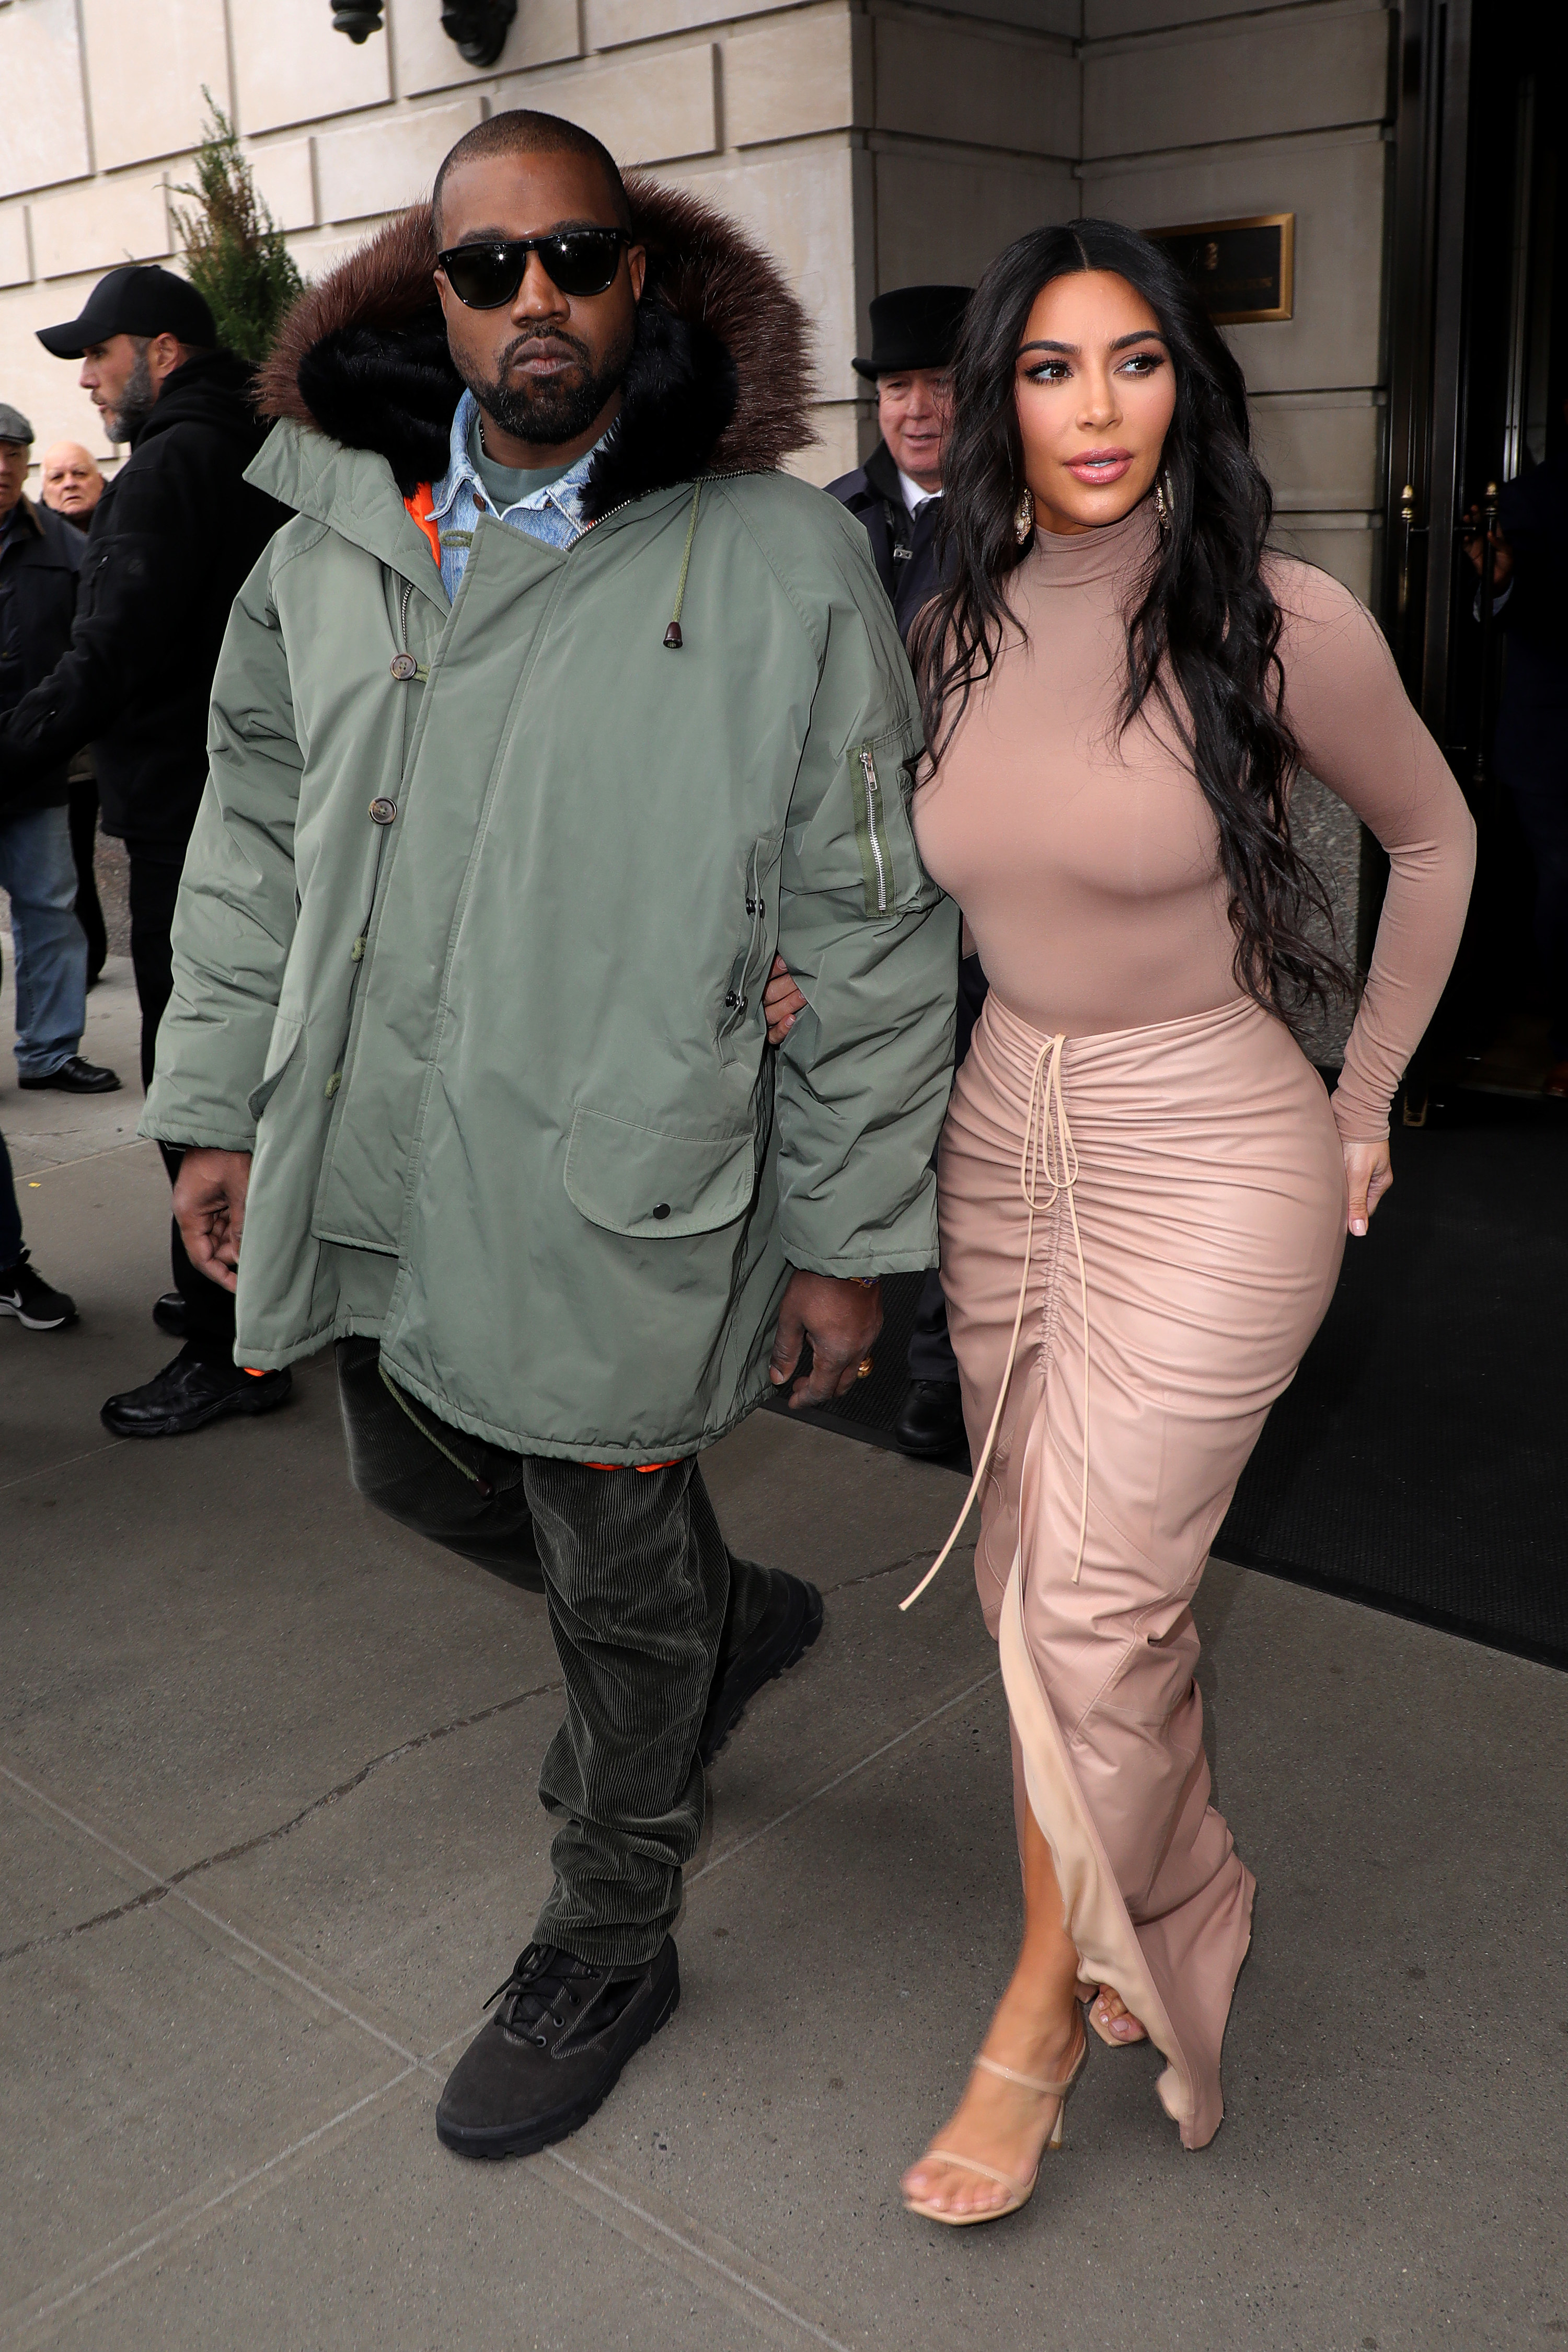 Kanye and Kim walk out of a building together